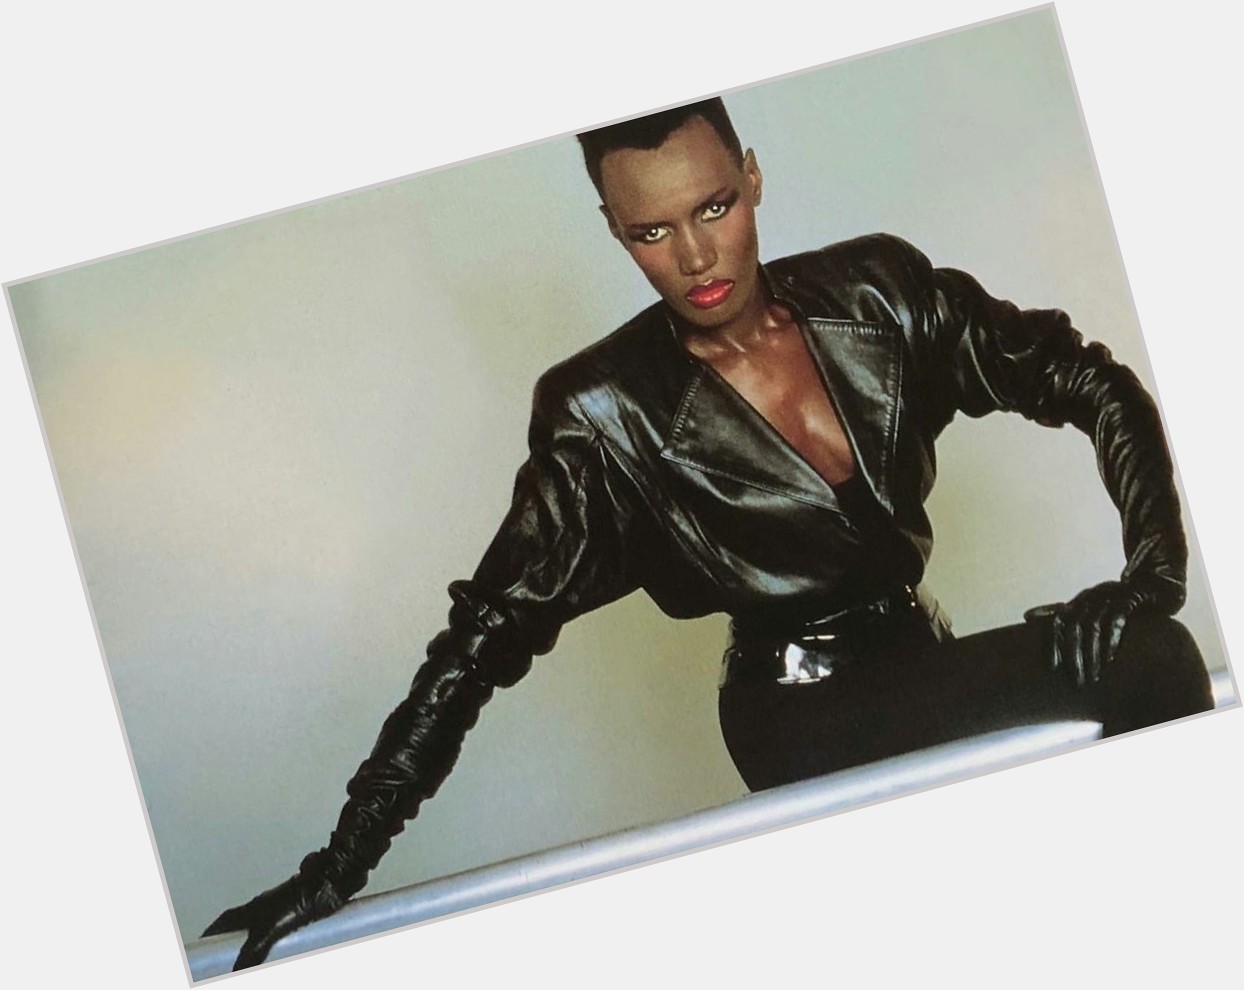 Happy Birthday Grace Jones!

What are some of your favorite songs sung by her? 